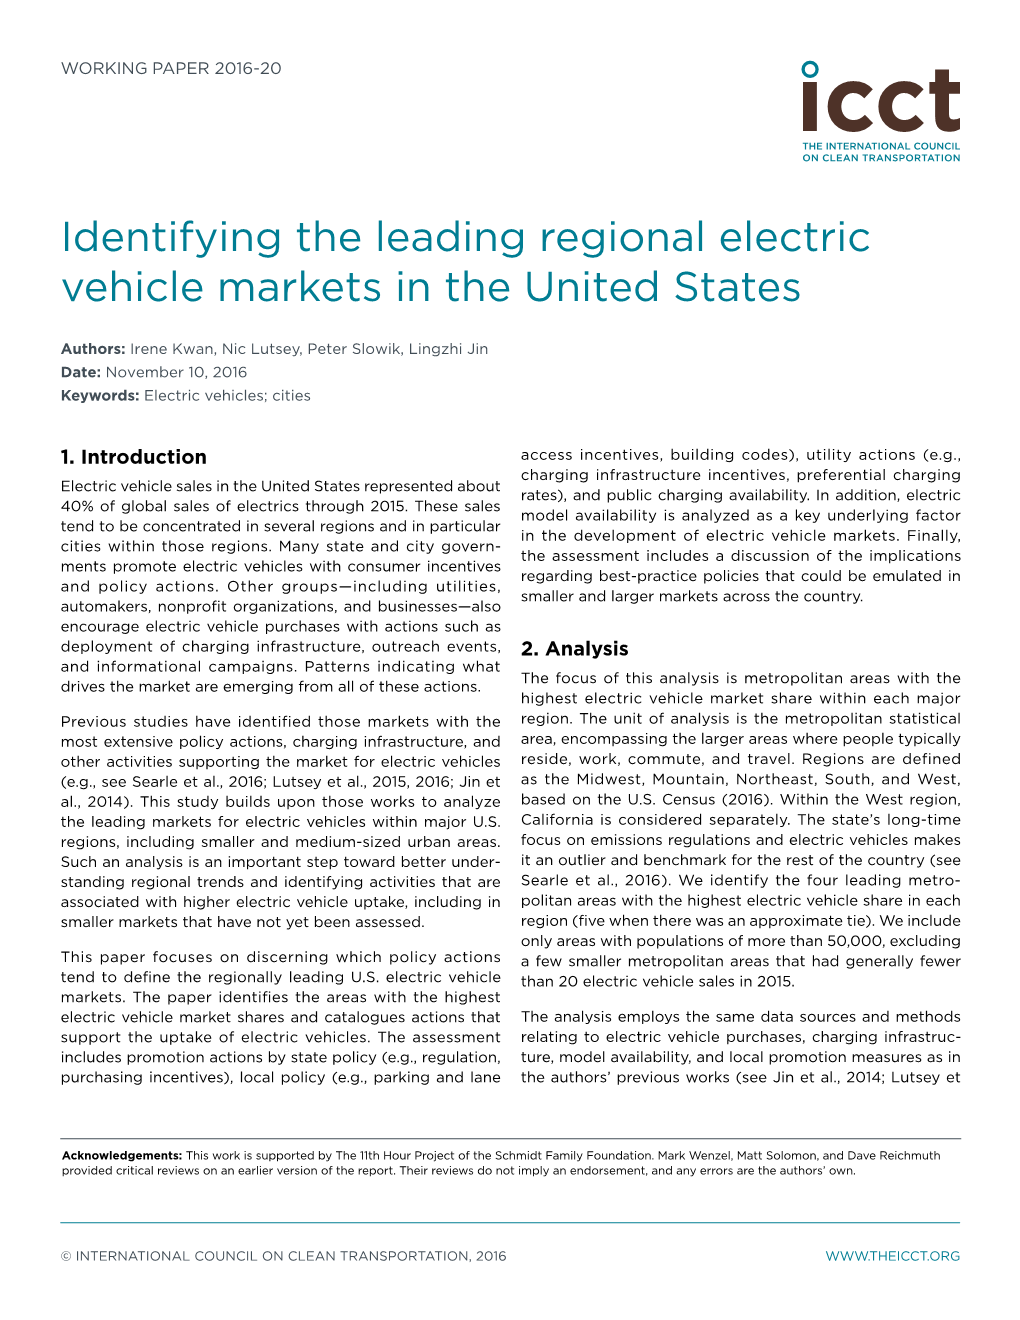 Identifying the Leading Regional Electric Vehicle Markets in the United States